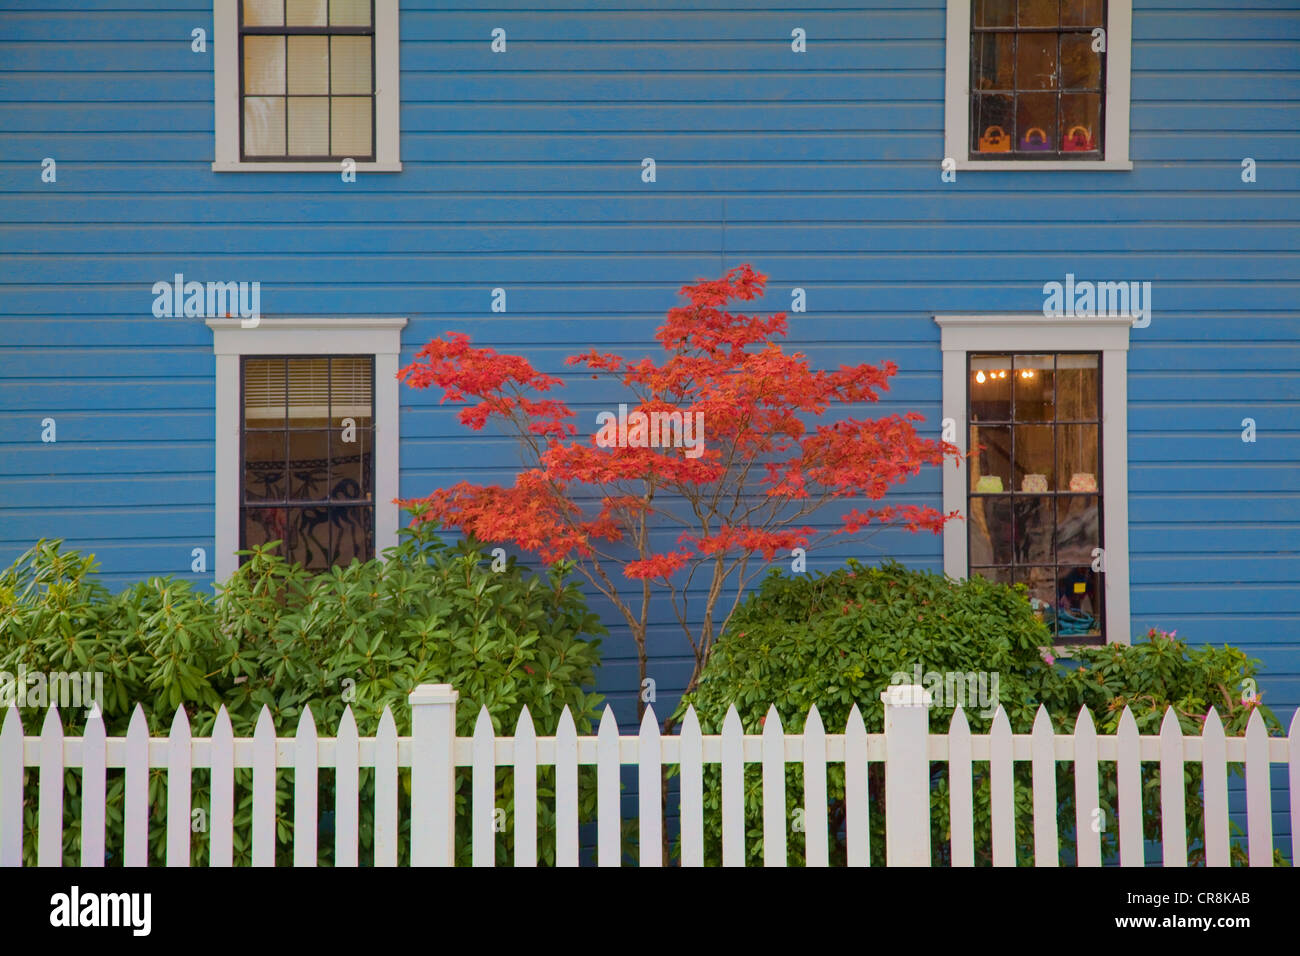 A house wall. Traditional clapboard painted blue. Windows. A tree, Japanese Maple, with red foliage. Stock Photo